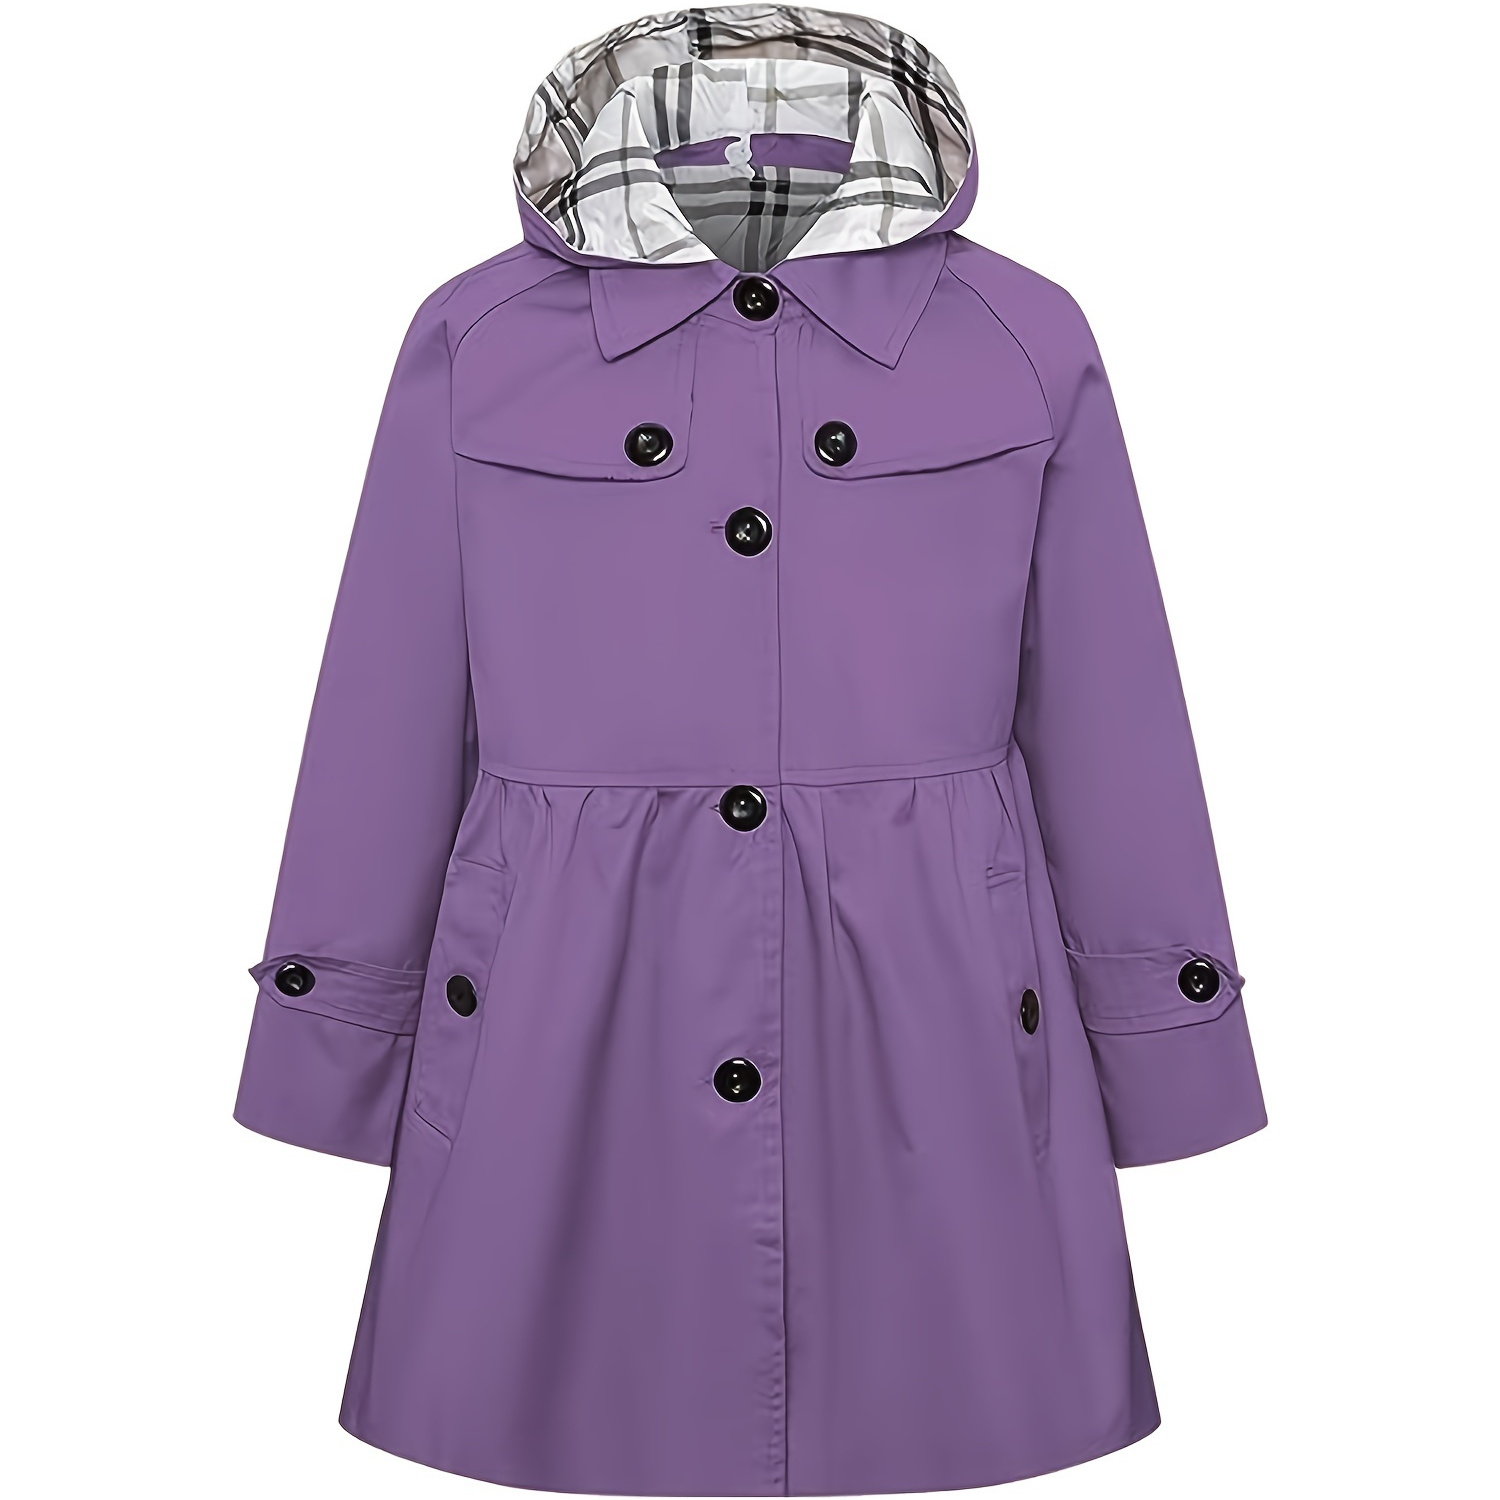 

Girls Jackets, Solid Hooded Trench Coat Outwear Long Dress Coats With Pockets